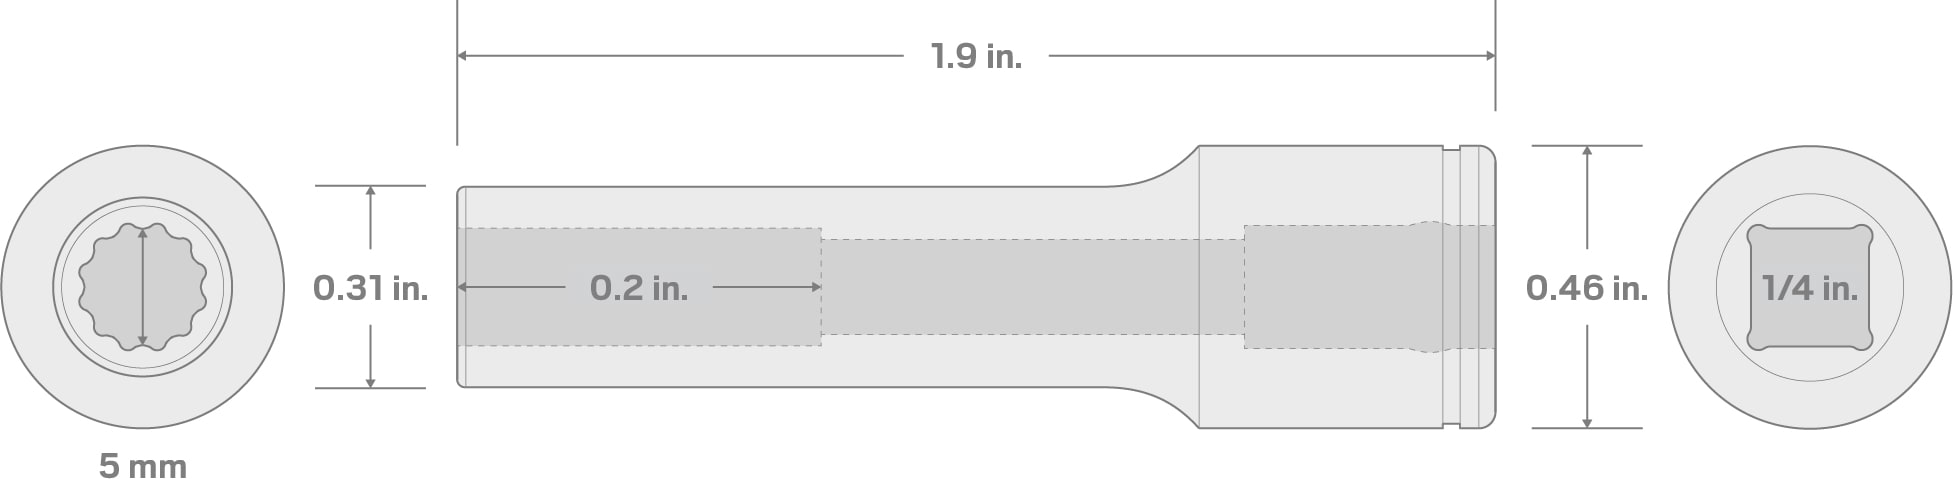 Specs for 1/4 Inch Drive x 5 mm Deep 12-Point Socket